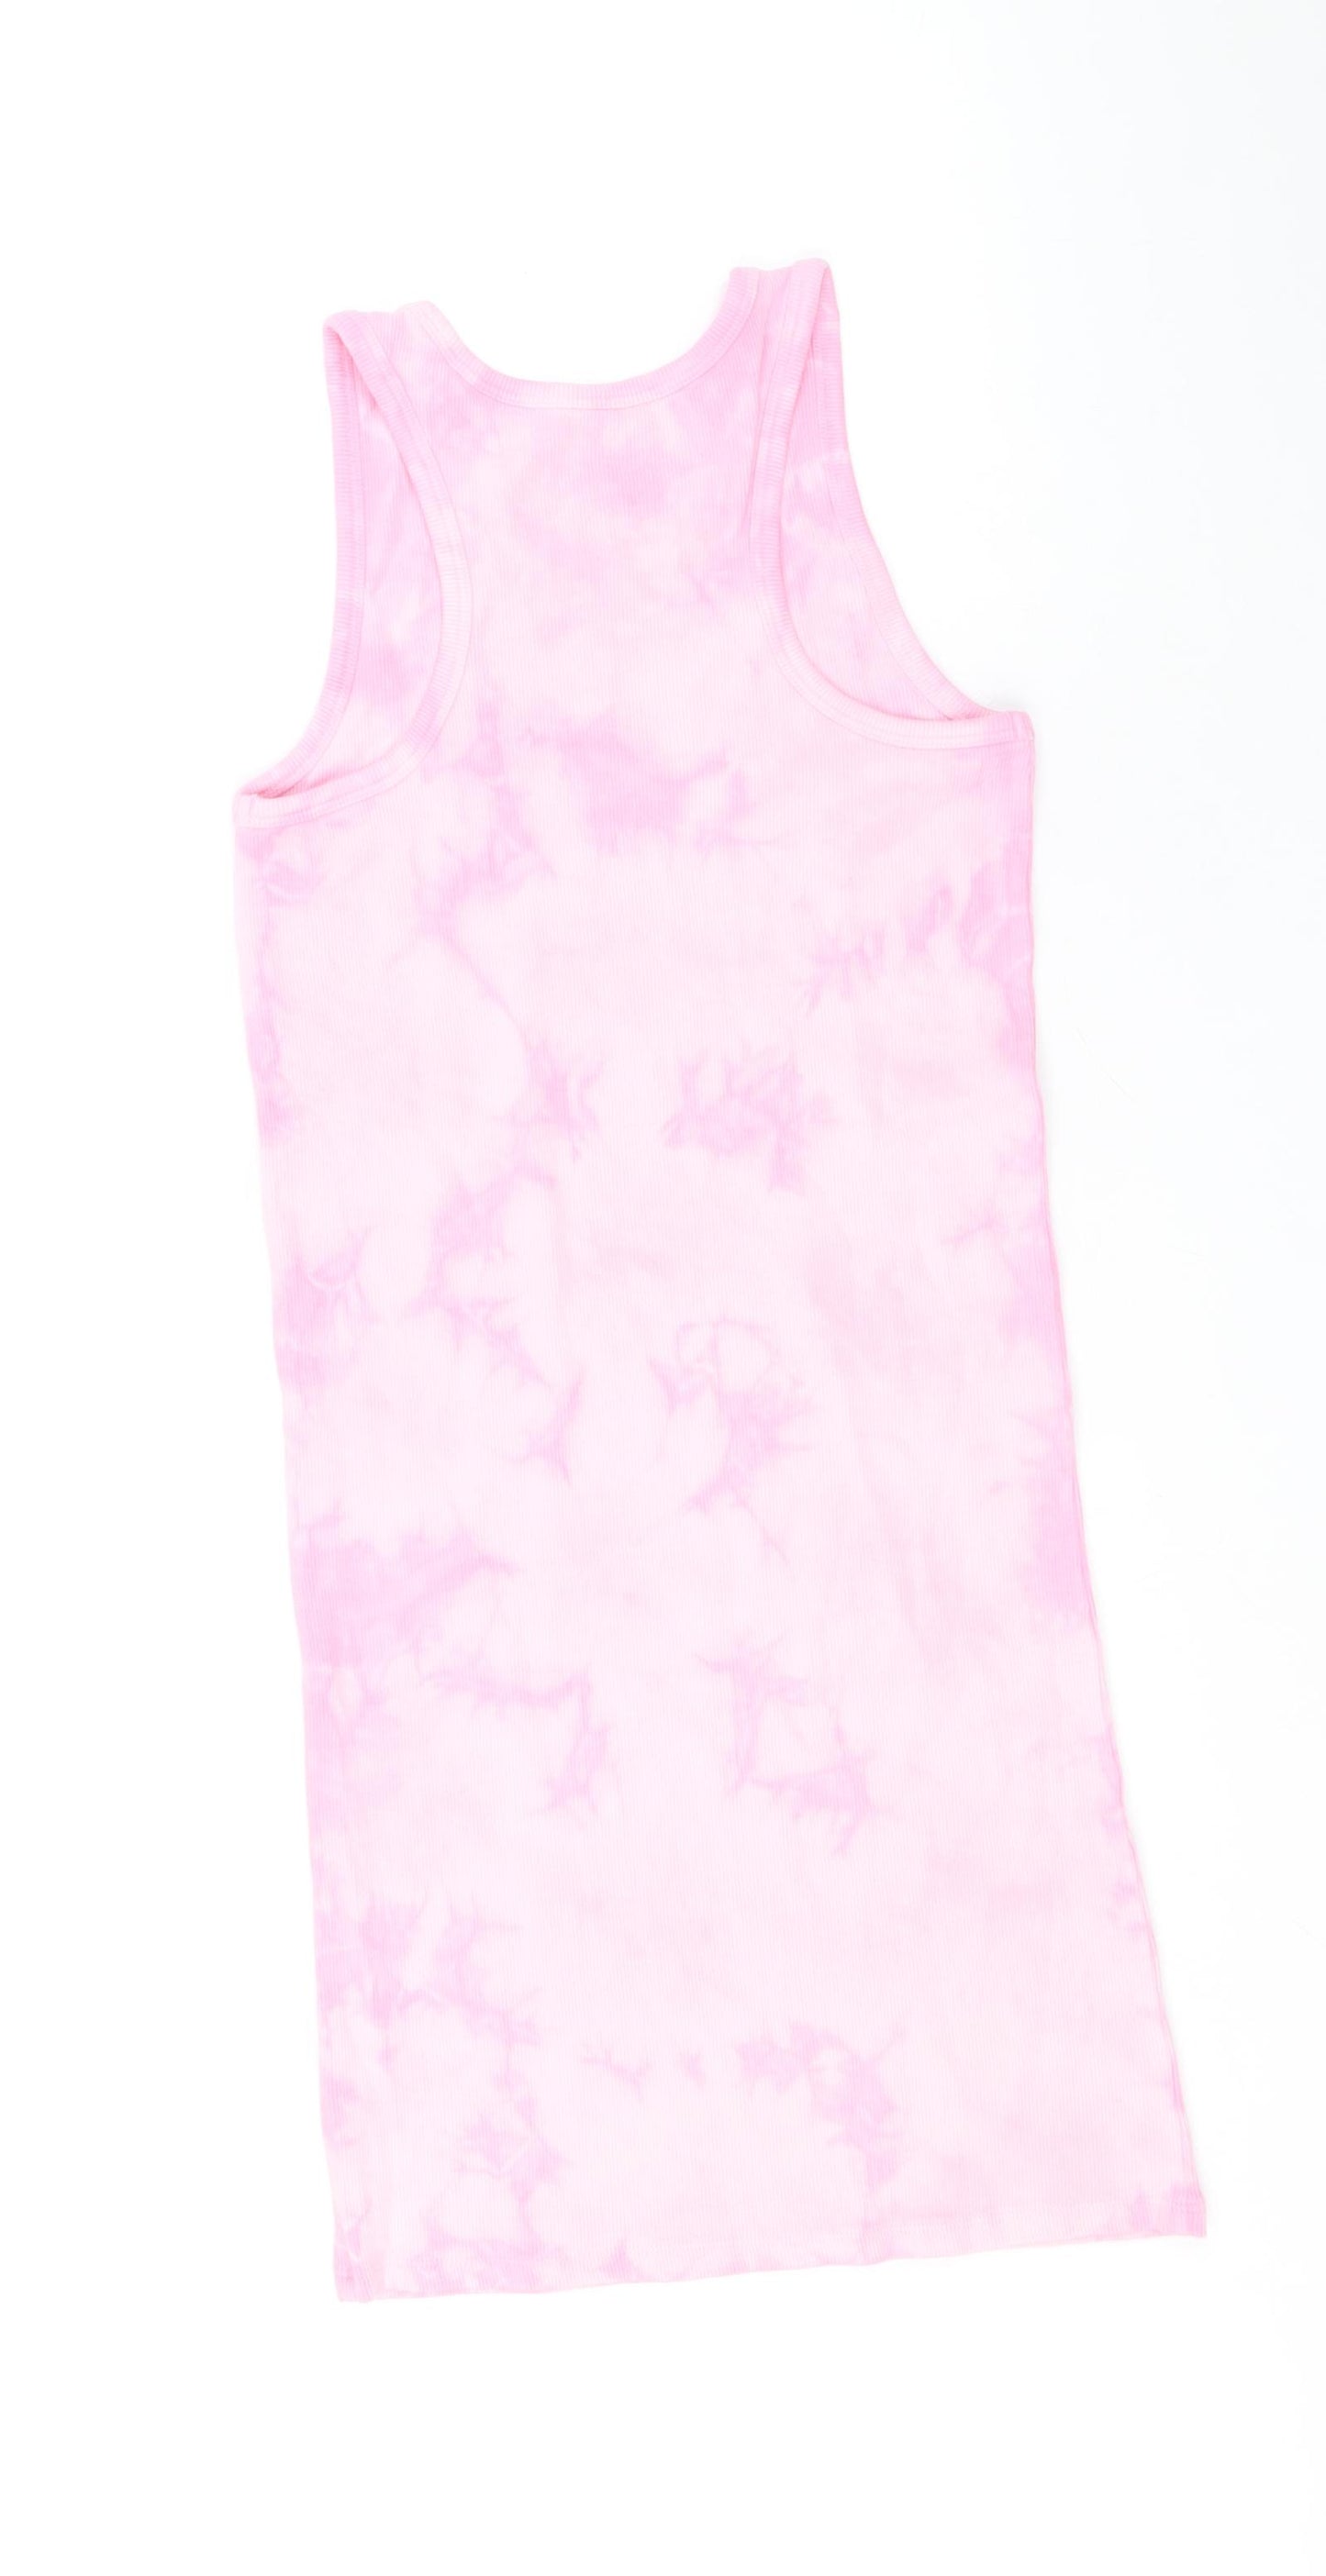 Marks and Spencer Girls Pink Geometric Cotton Tank Dress Size 11-12 Years Round Neck Pullover - Tie Dye Pattern